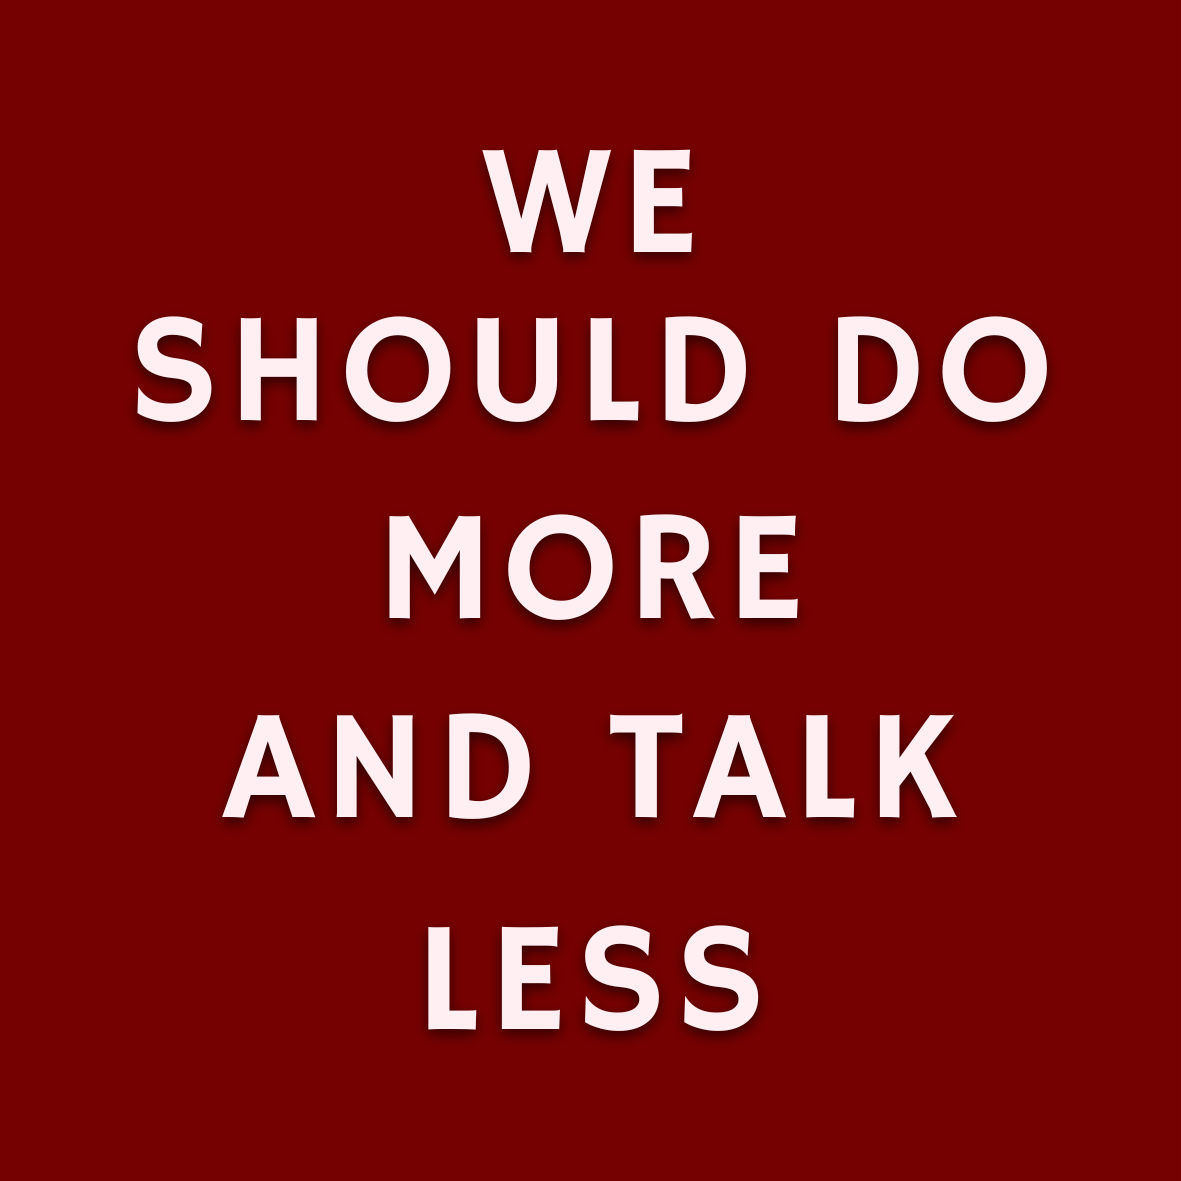 Motto: We should do more and talk less